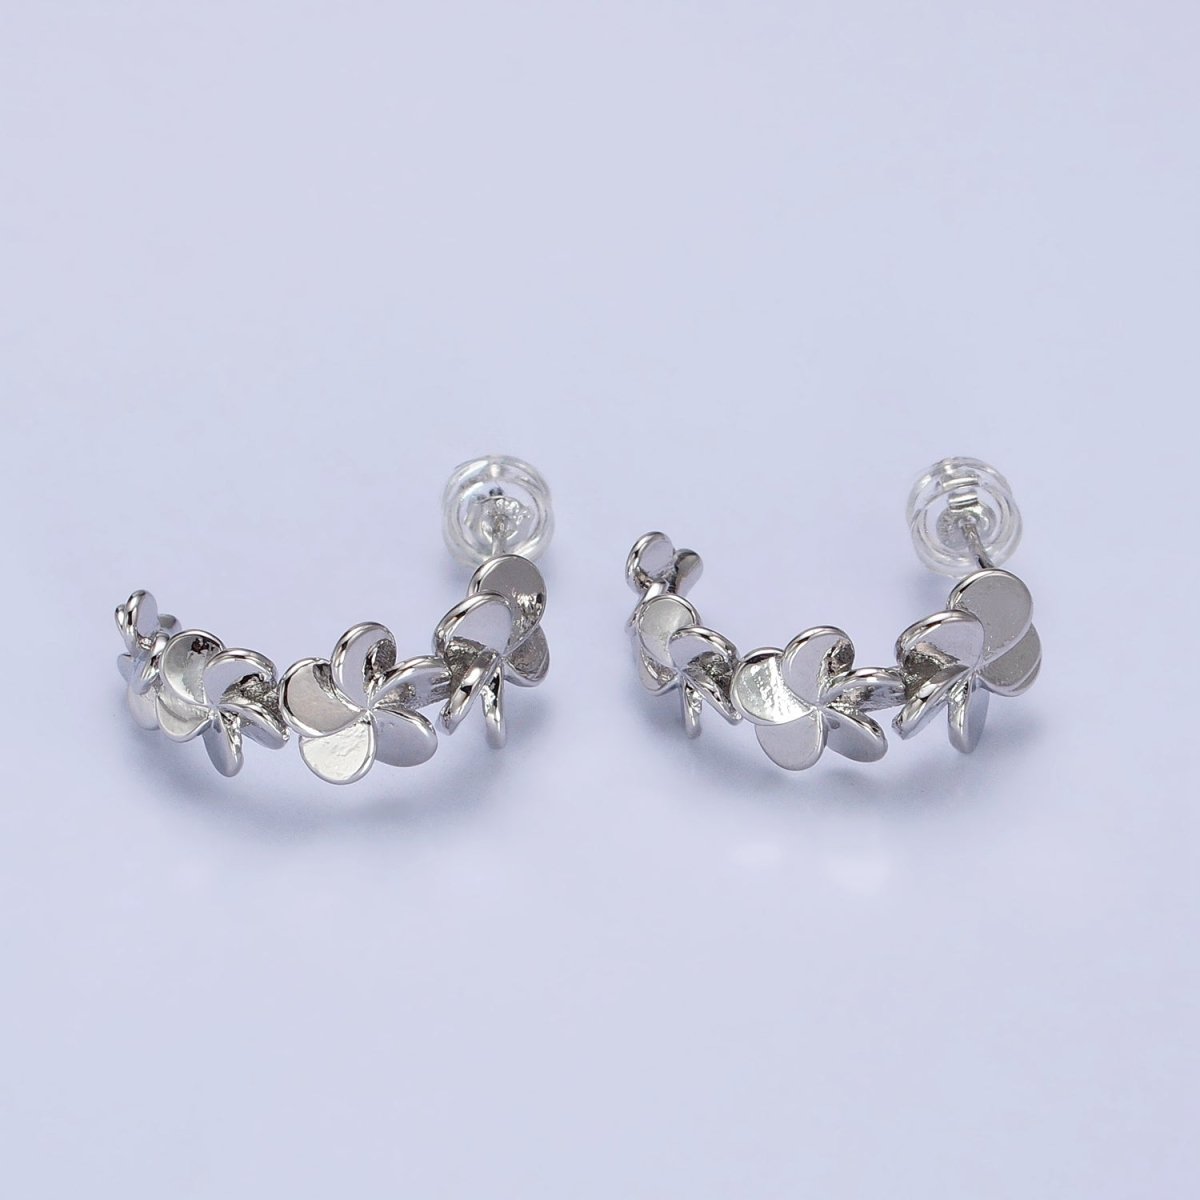 Silver, Gold Spiral Nature Flower Petal C-Shaped Hoop Earrings | AB447 AB455 - DLUXCA